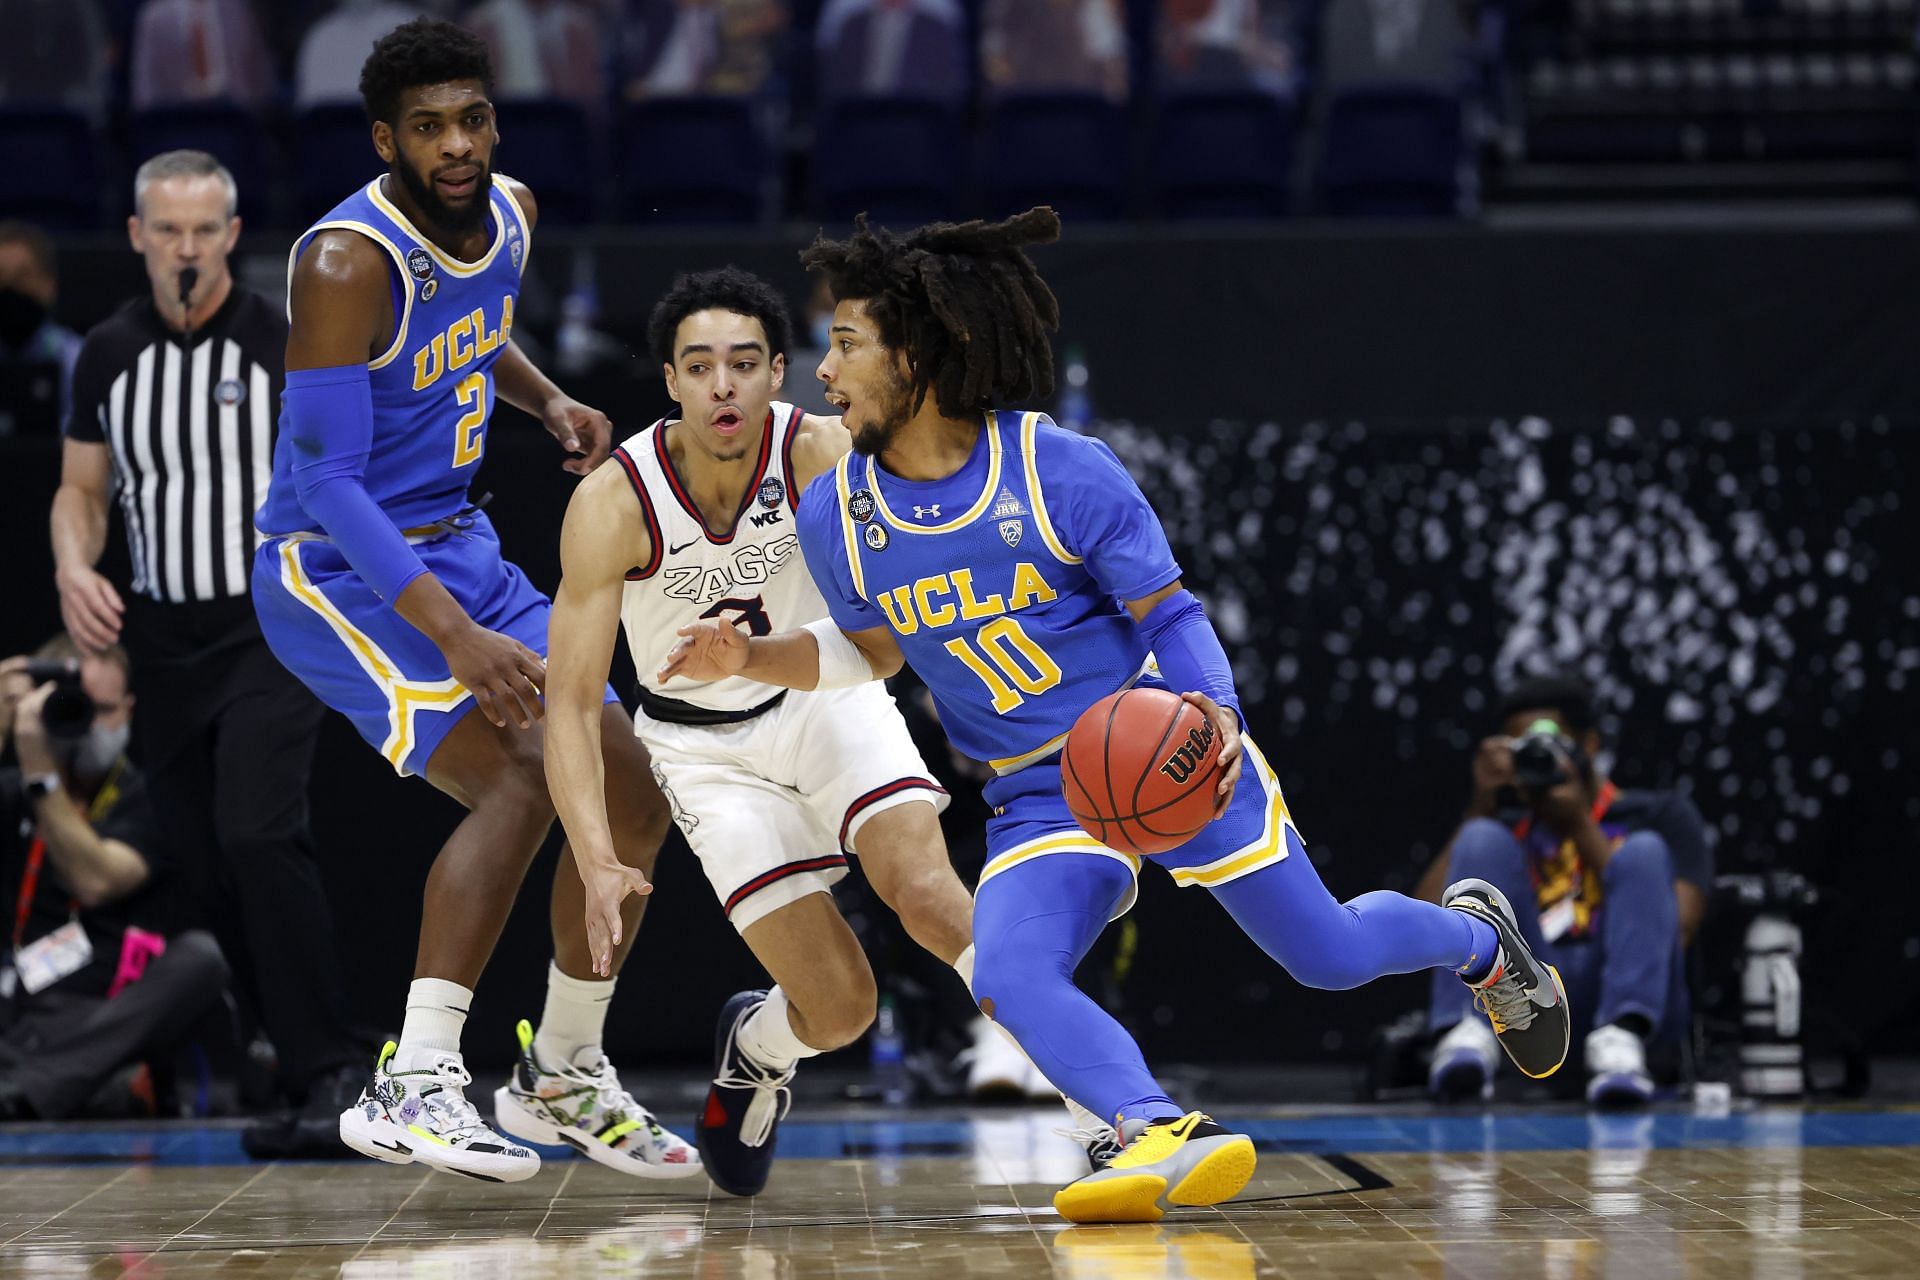 The 2020-21 UCLA Bruins were three points away from making the final but Gonzaga held them off in overtime.